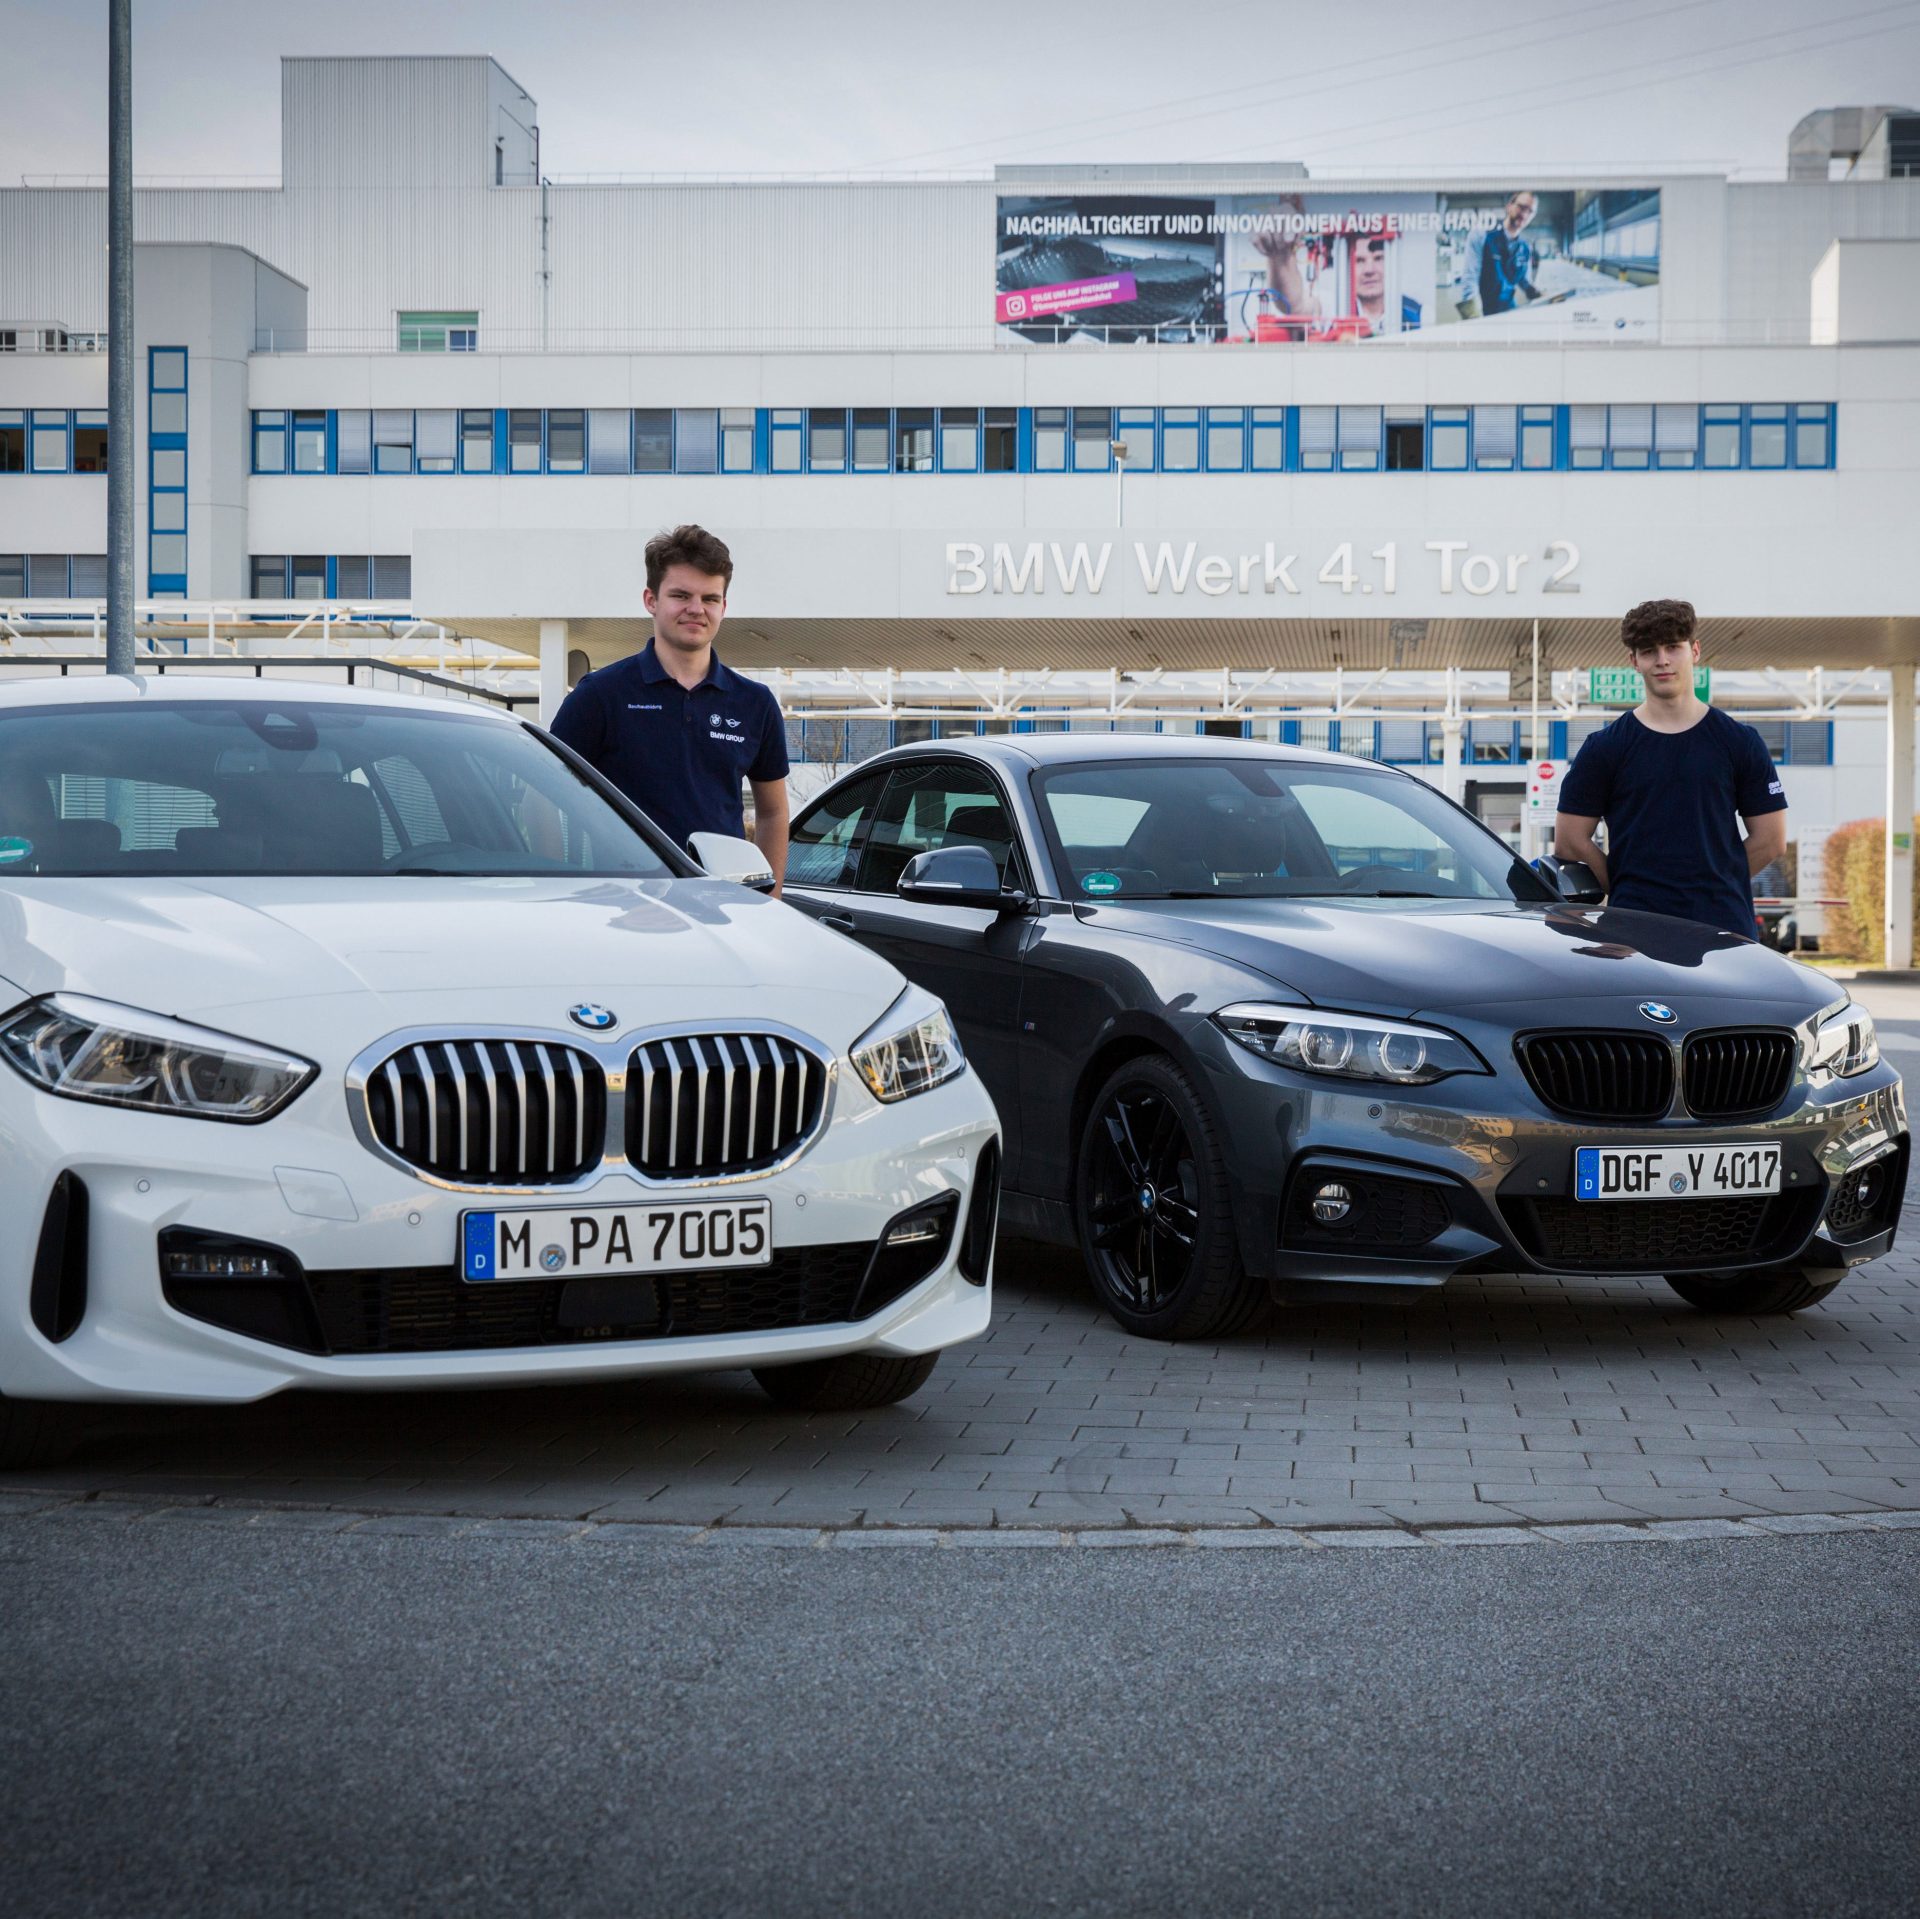 The picture shows two apprentices standing next to their cars.